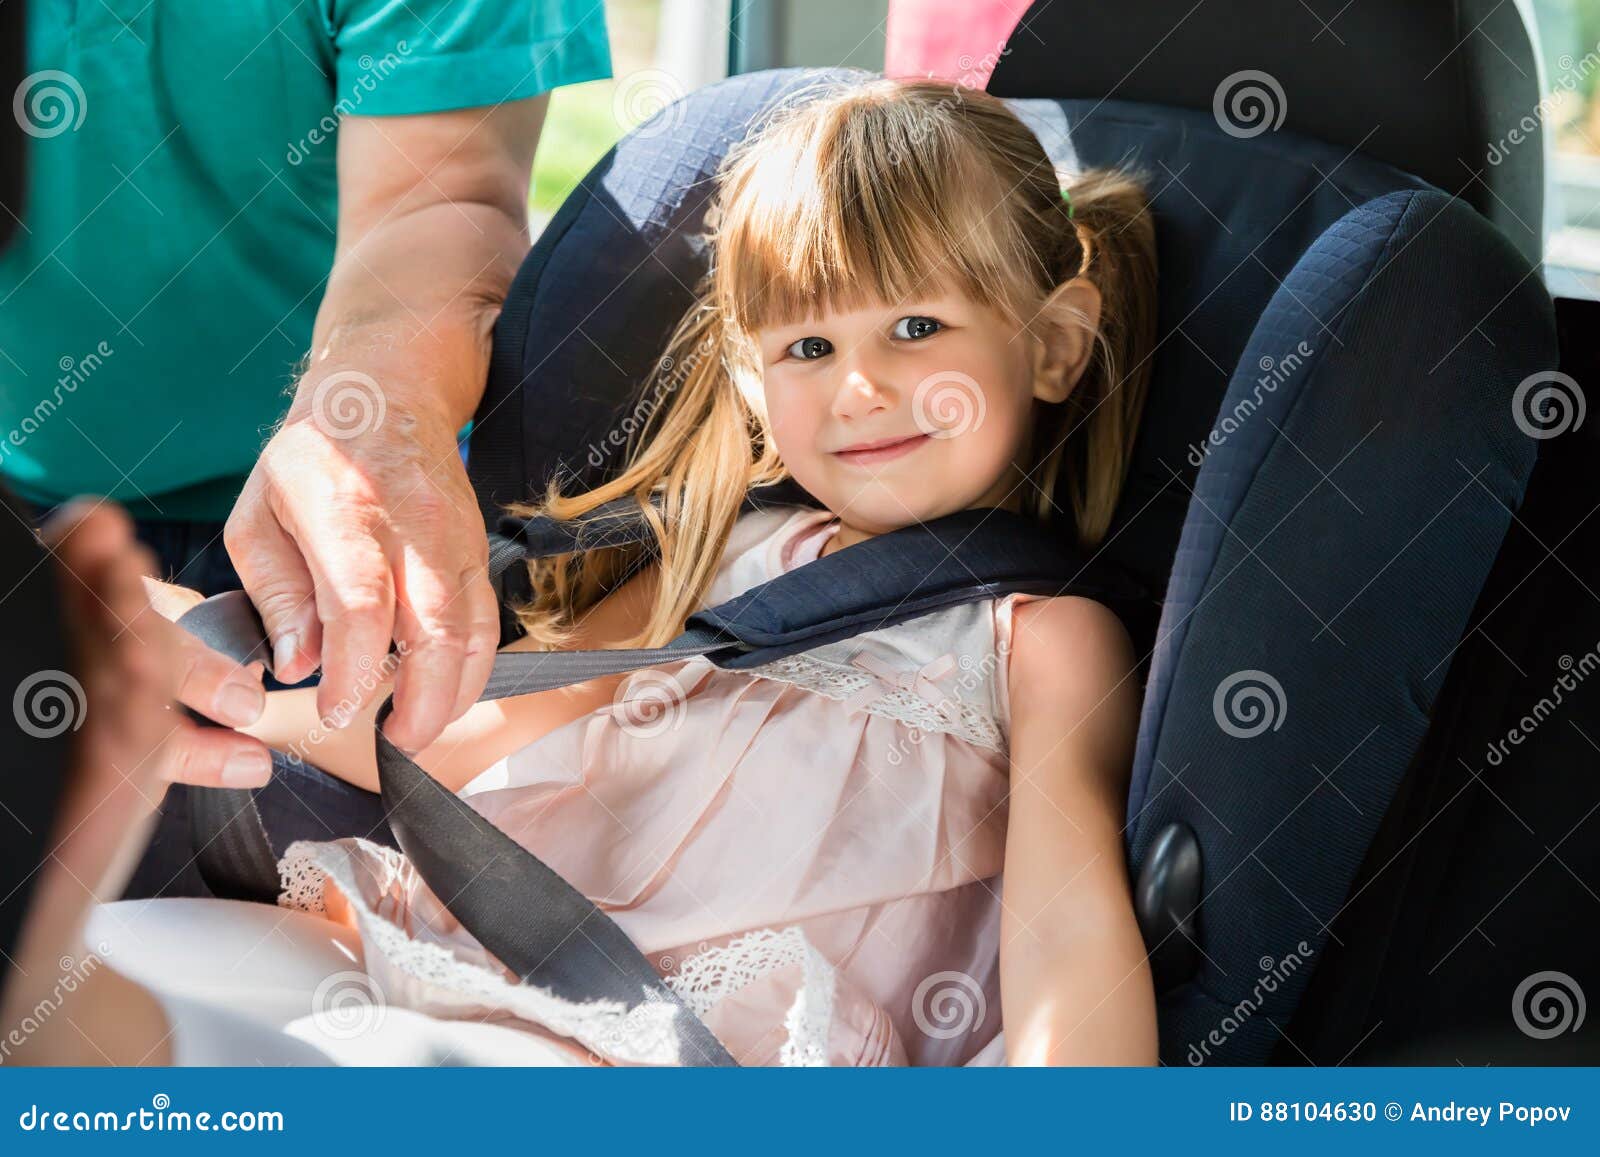 grandfather buckling up on granddaughter in car safety seat